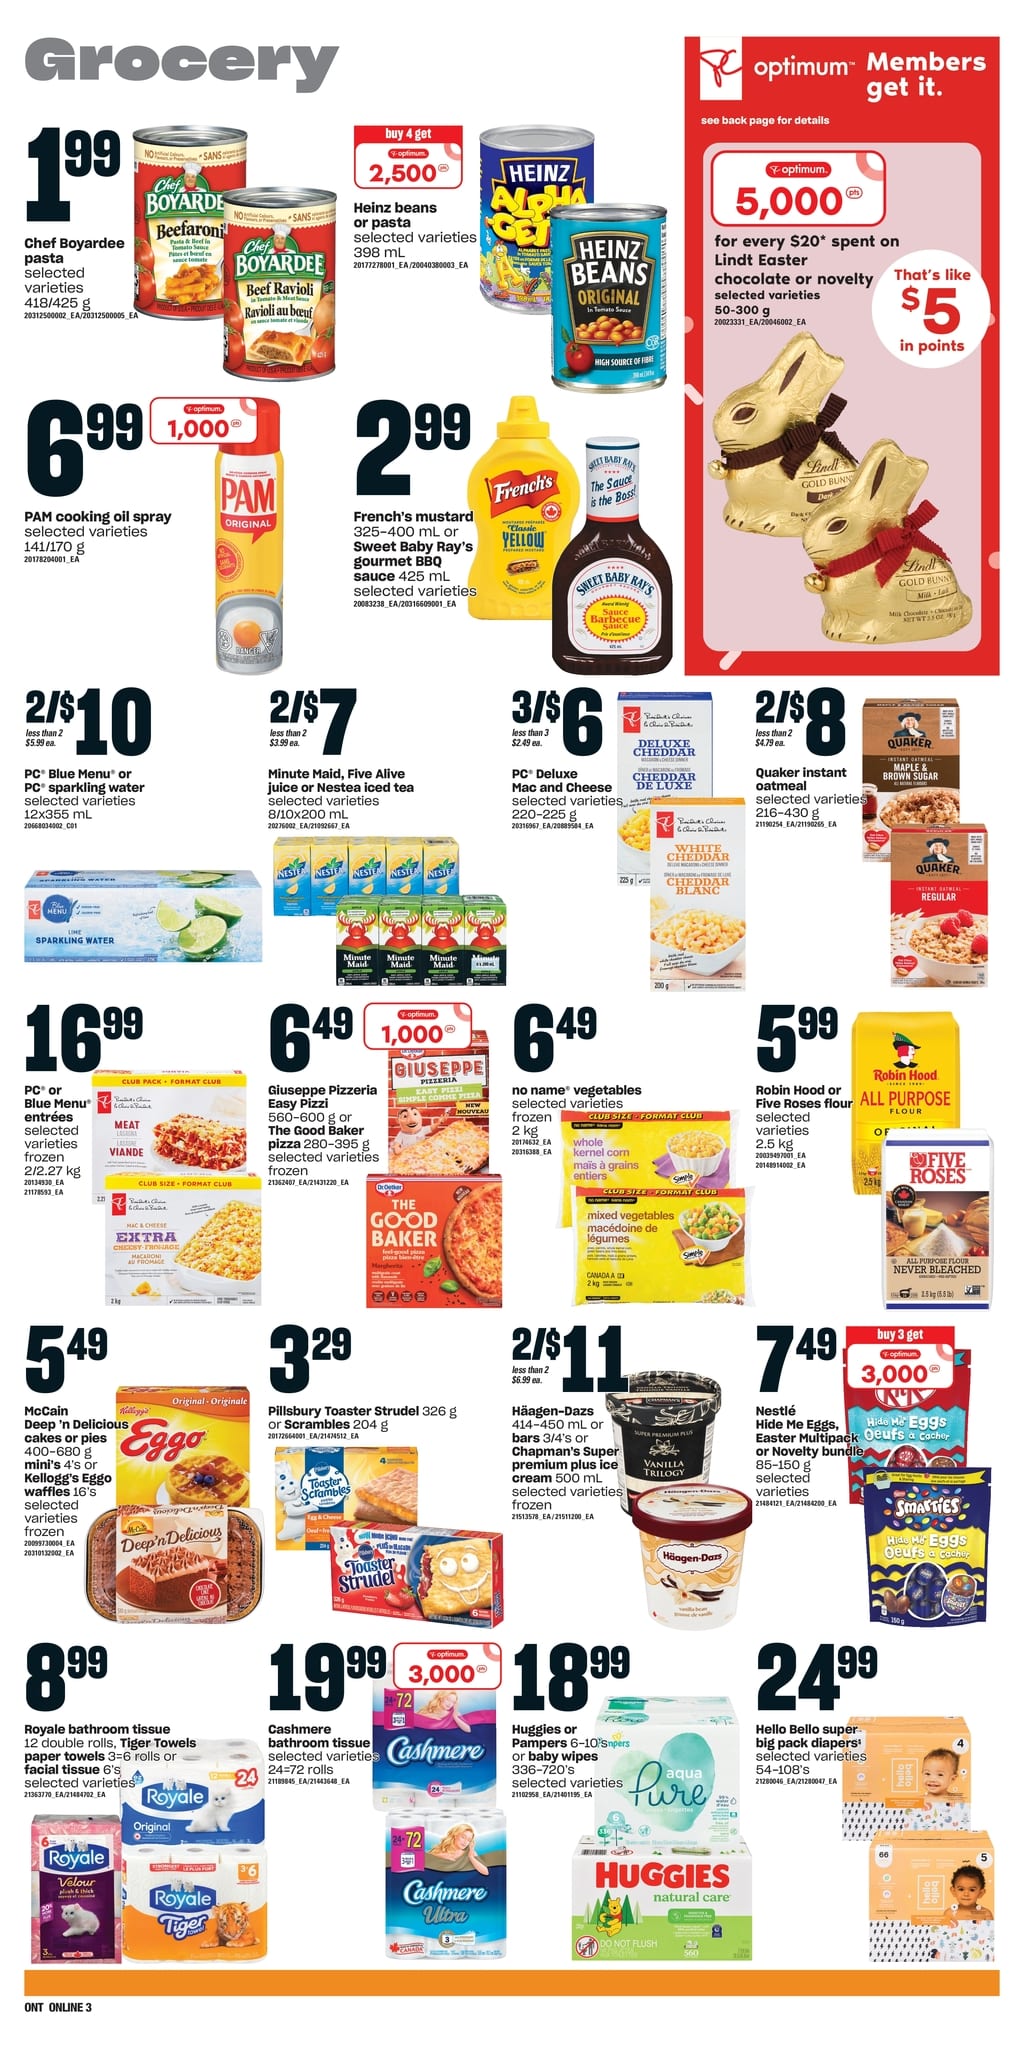 Zehrs - Weekly Flyer Specials - Page 8